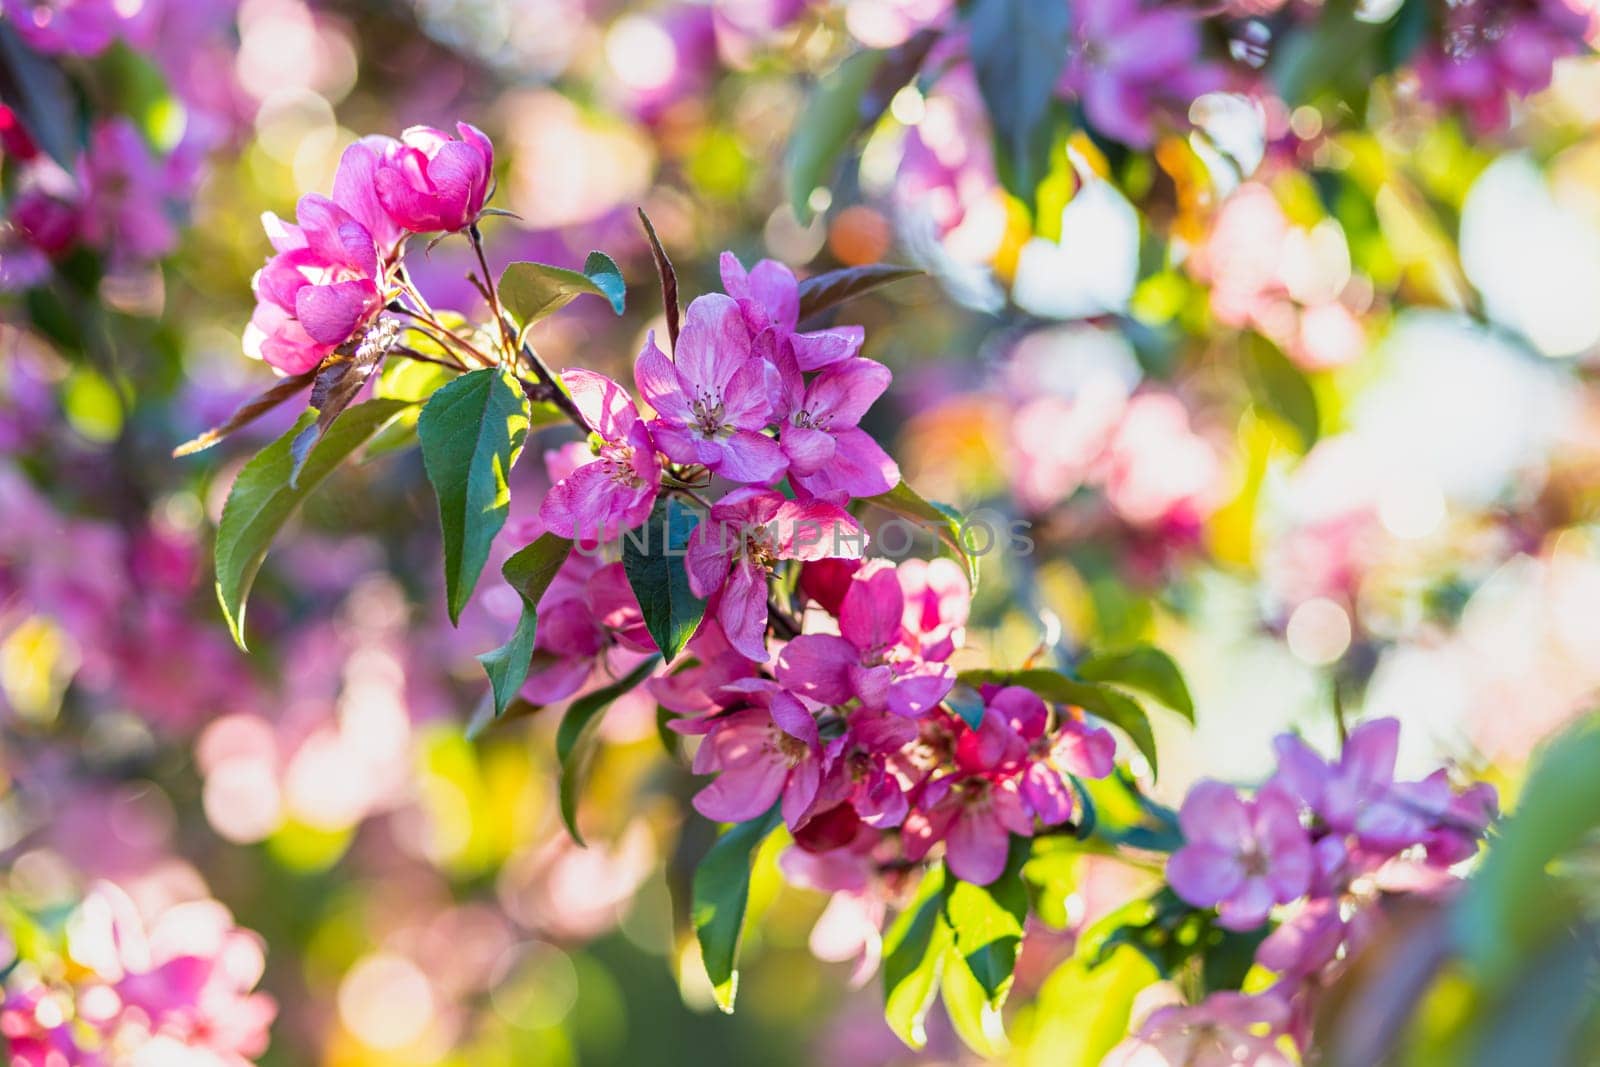 Spring blossom of a decorative apple tree, purple flowers on a green tree in the rays of the sunset.